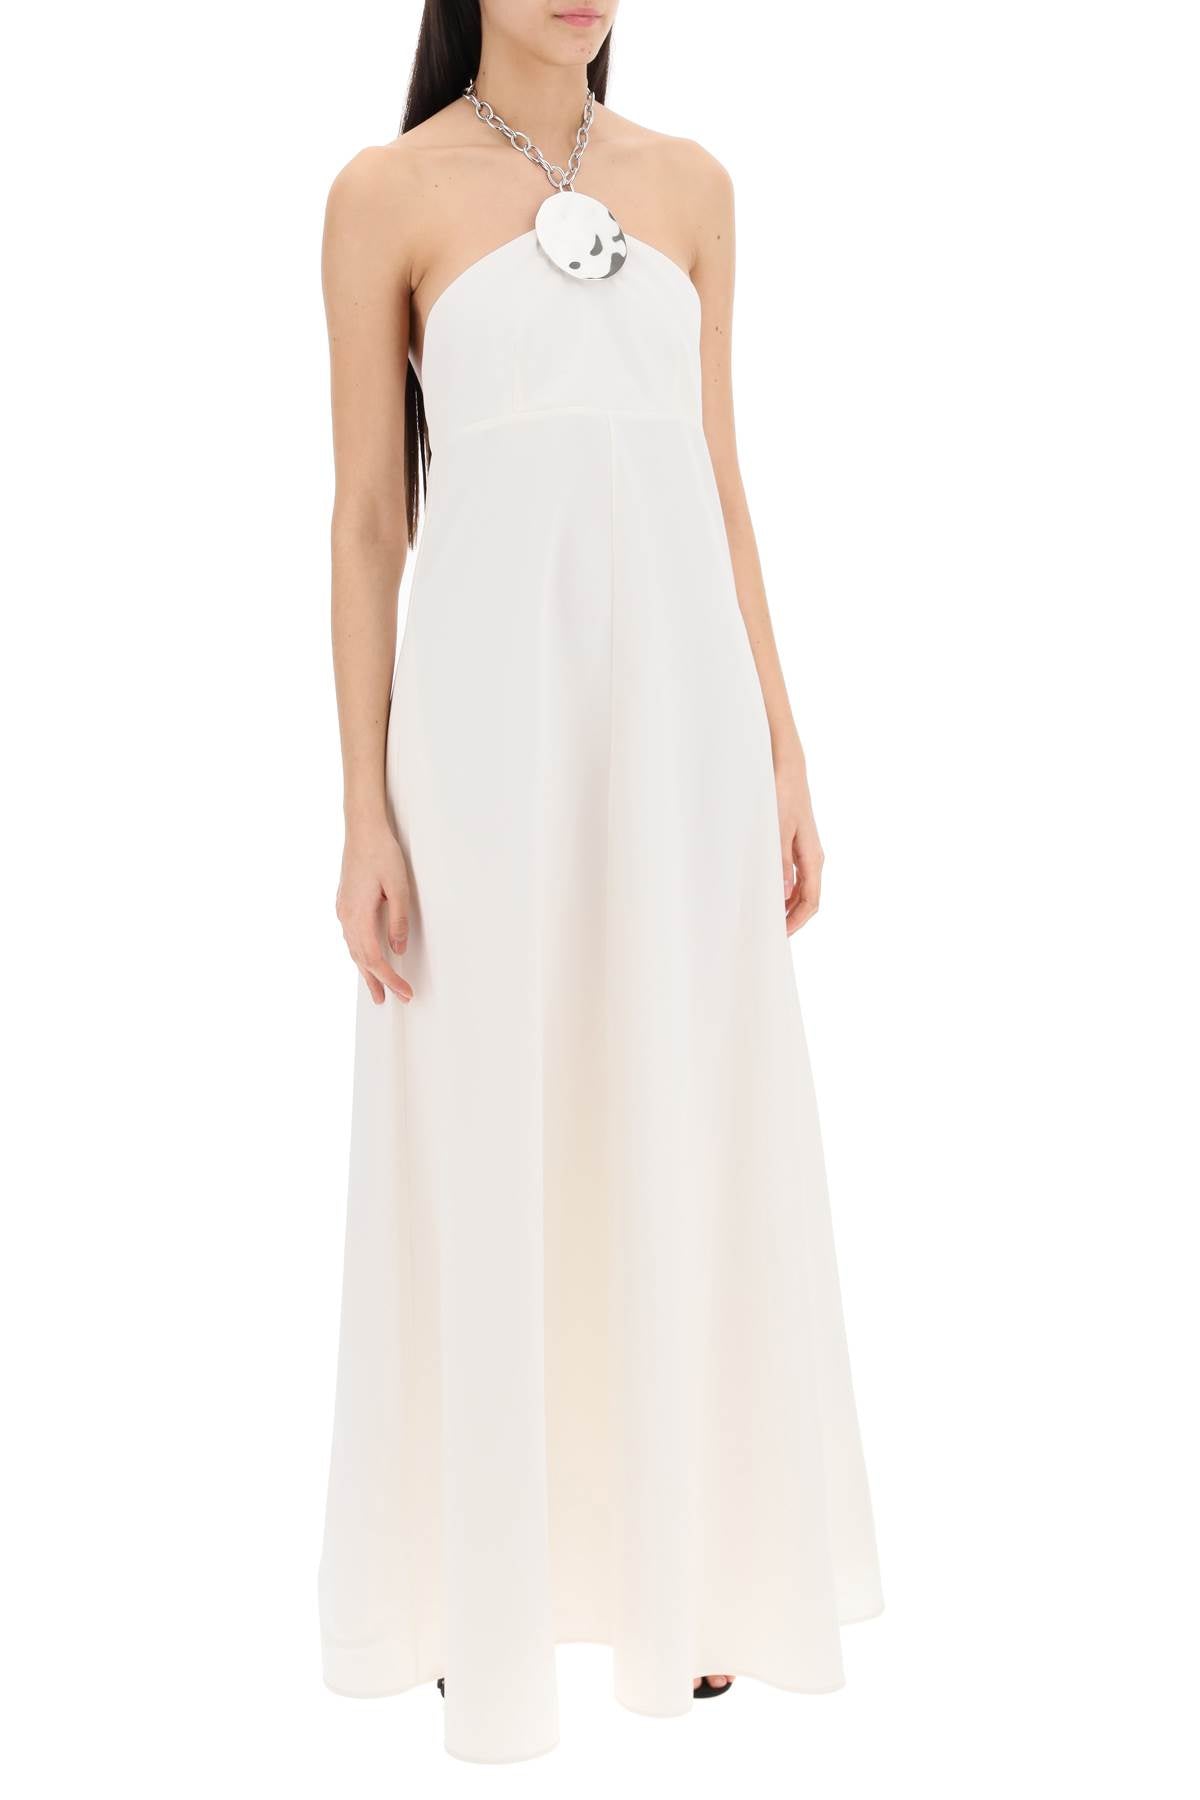 JIL SANDER Elegant White Maxi Dress with Integrated Necklace for Women, SS24 Collection